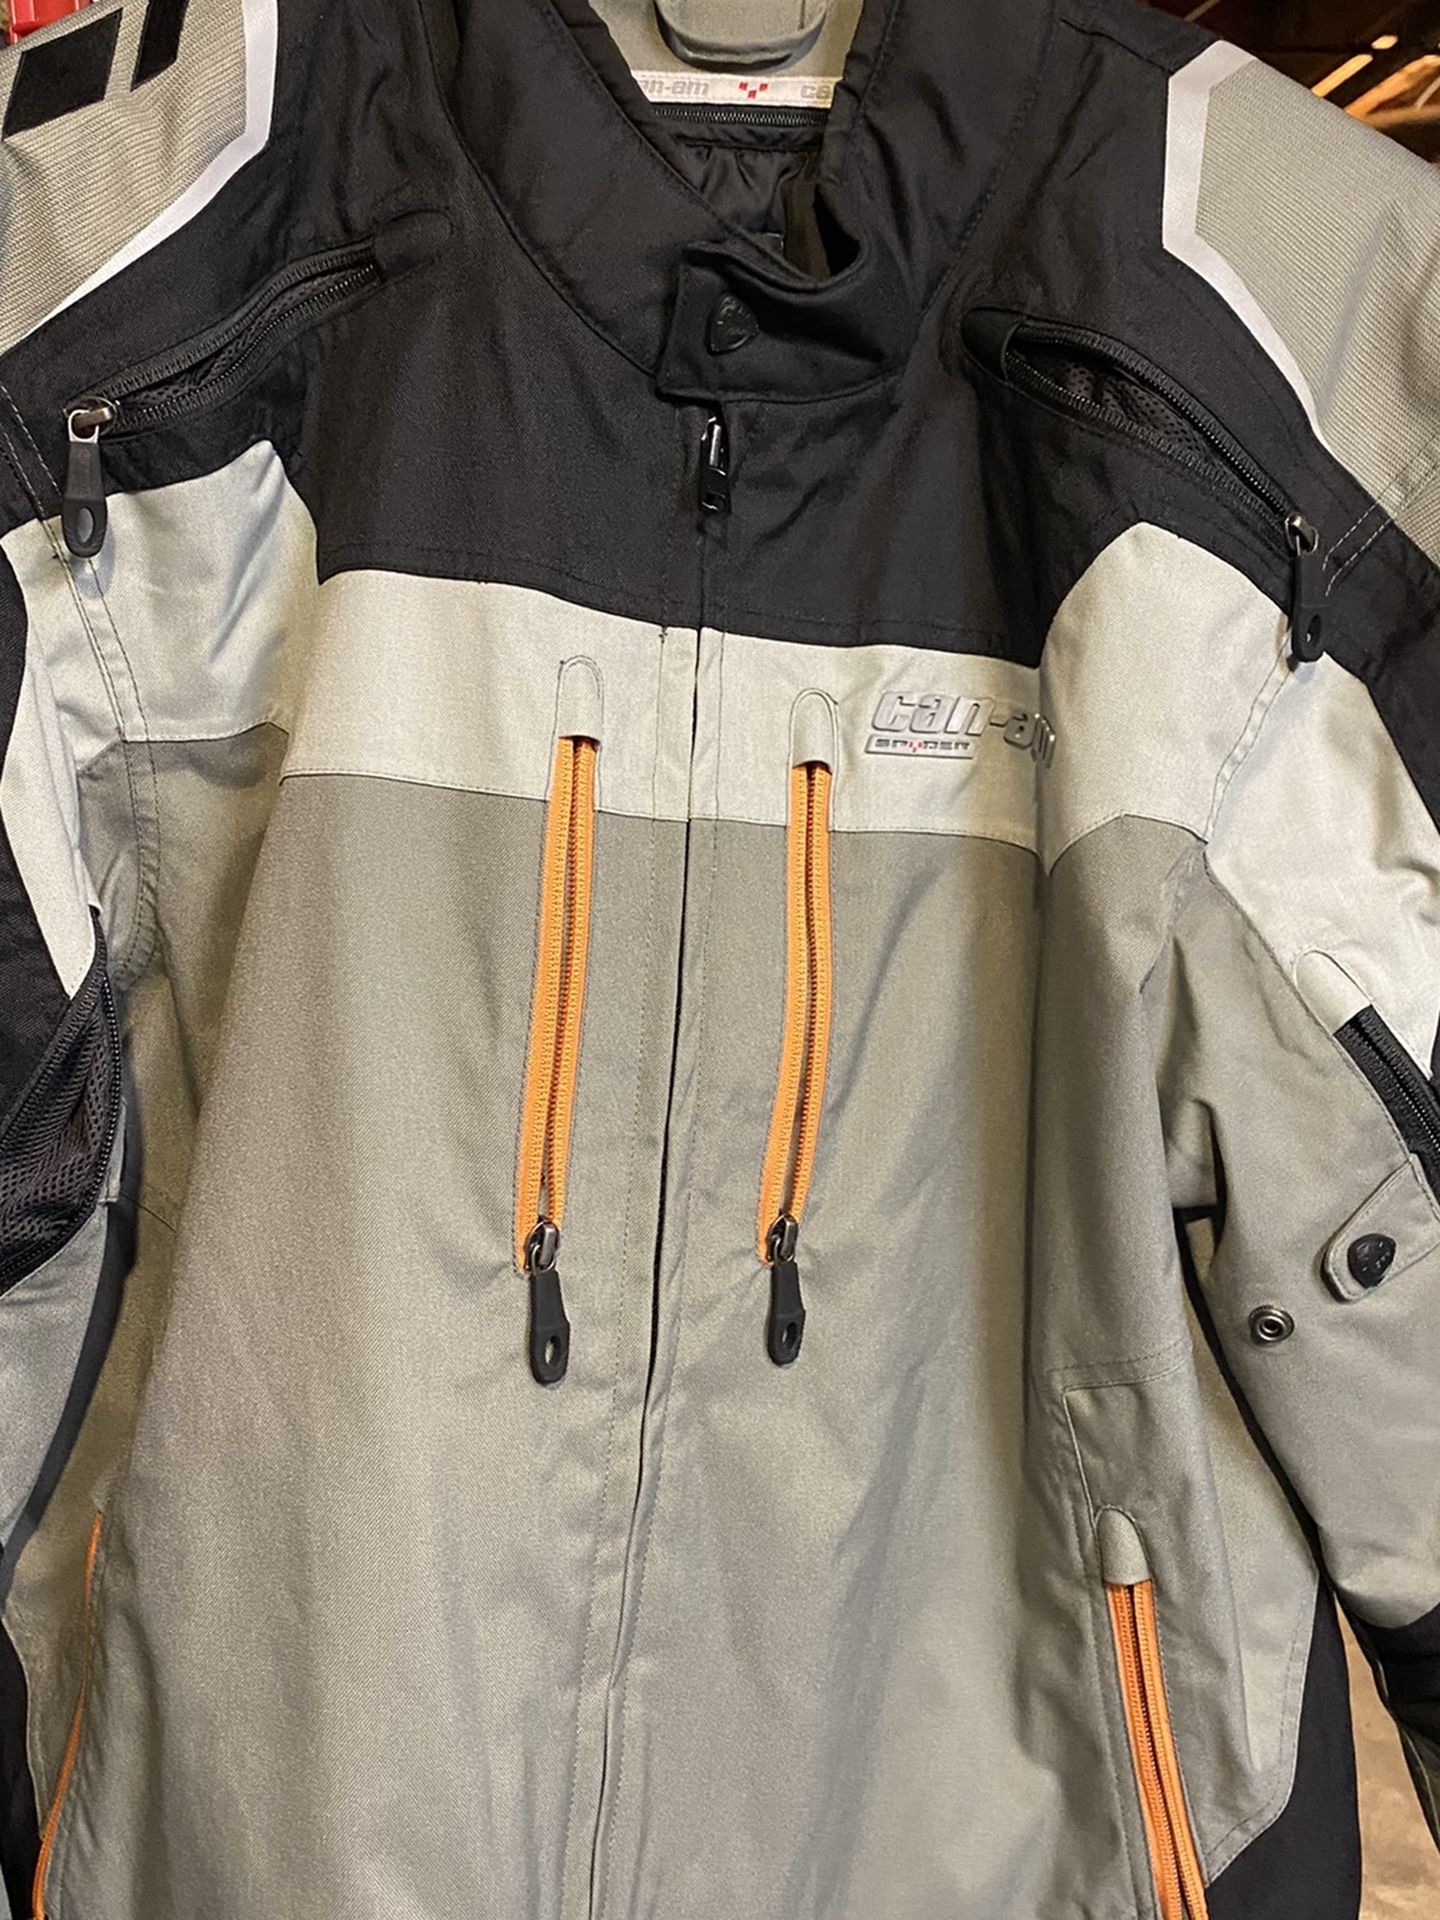 Photo CanAm RPM jacket with removable liner. Mens Large. Excellent condition.